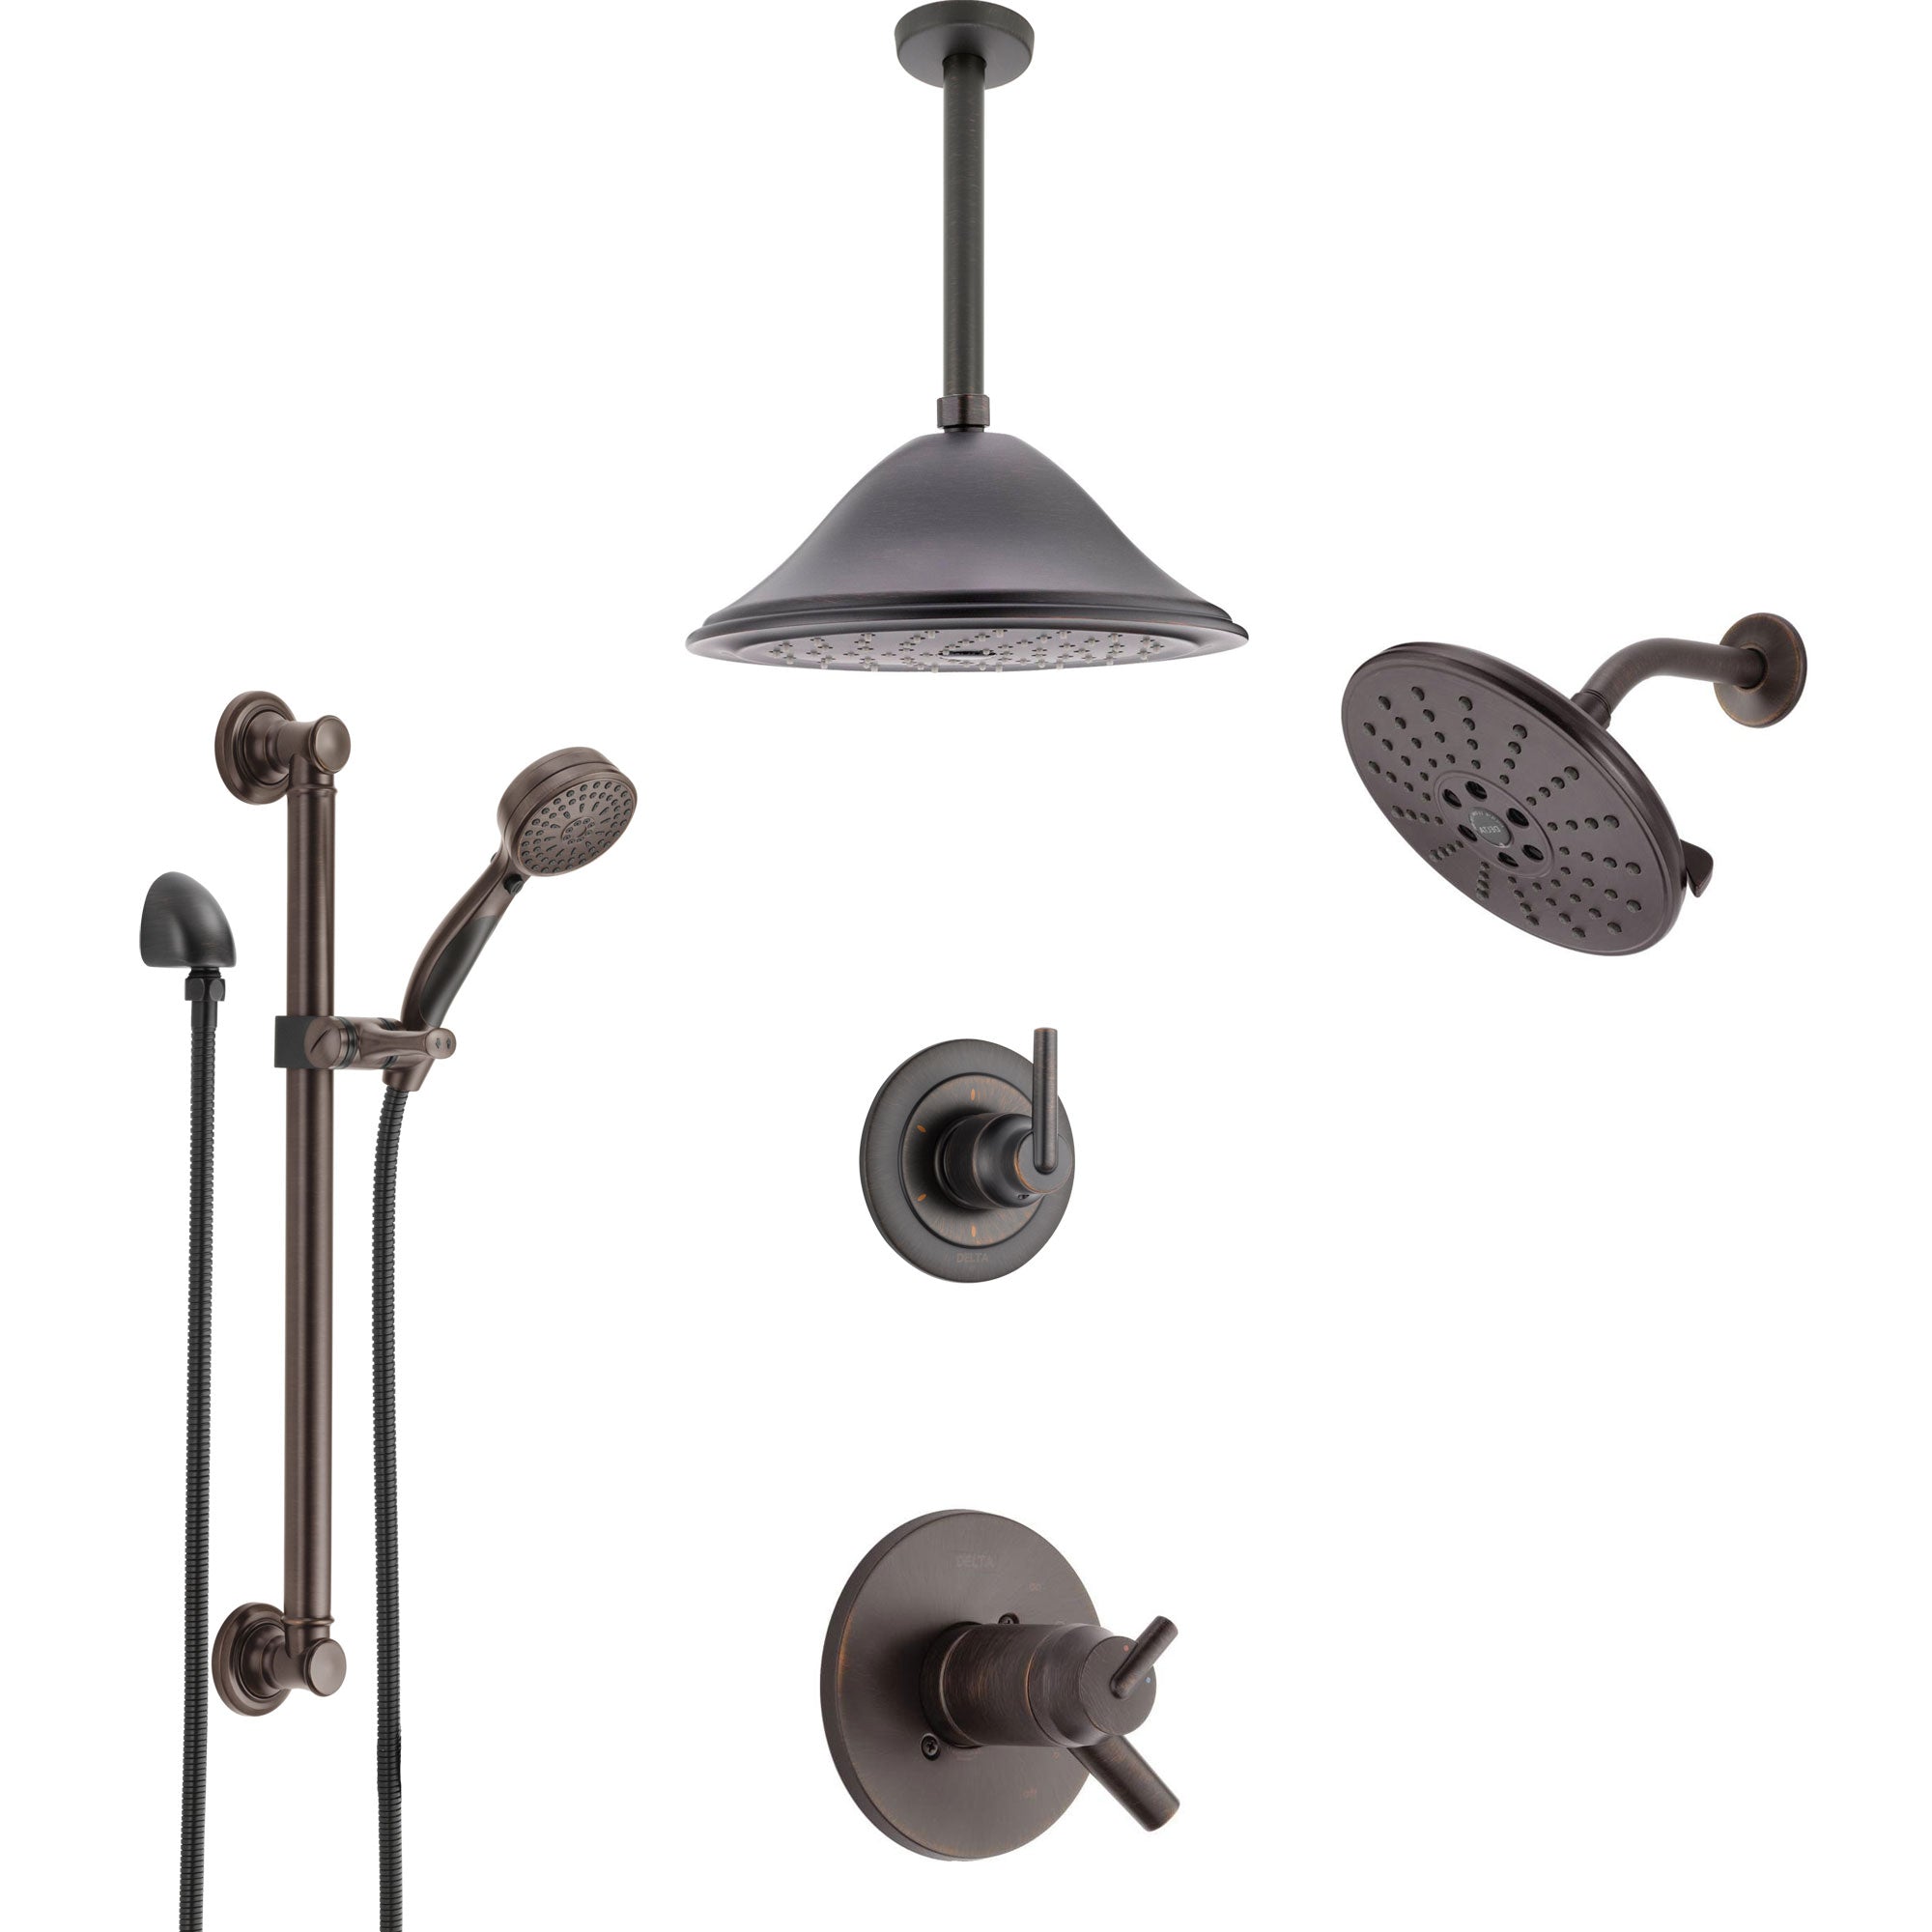 Delta Trinsic Venetian Bronze Dual Thermostatic Control Shower System, Diverter, Showerhead, Ceiling Showerhead, and Grab Bar Hand Spray SS17T2591RB6